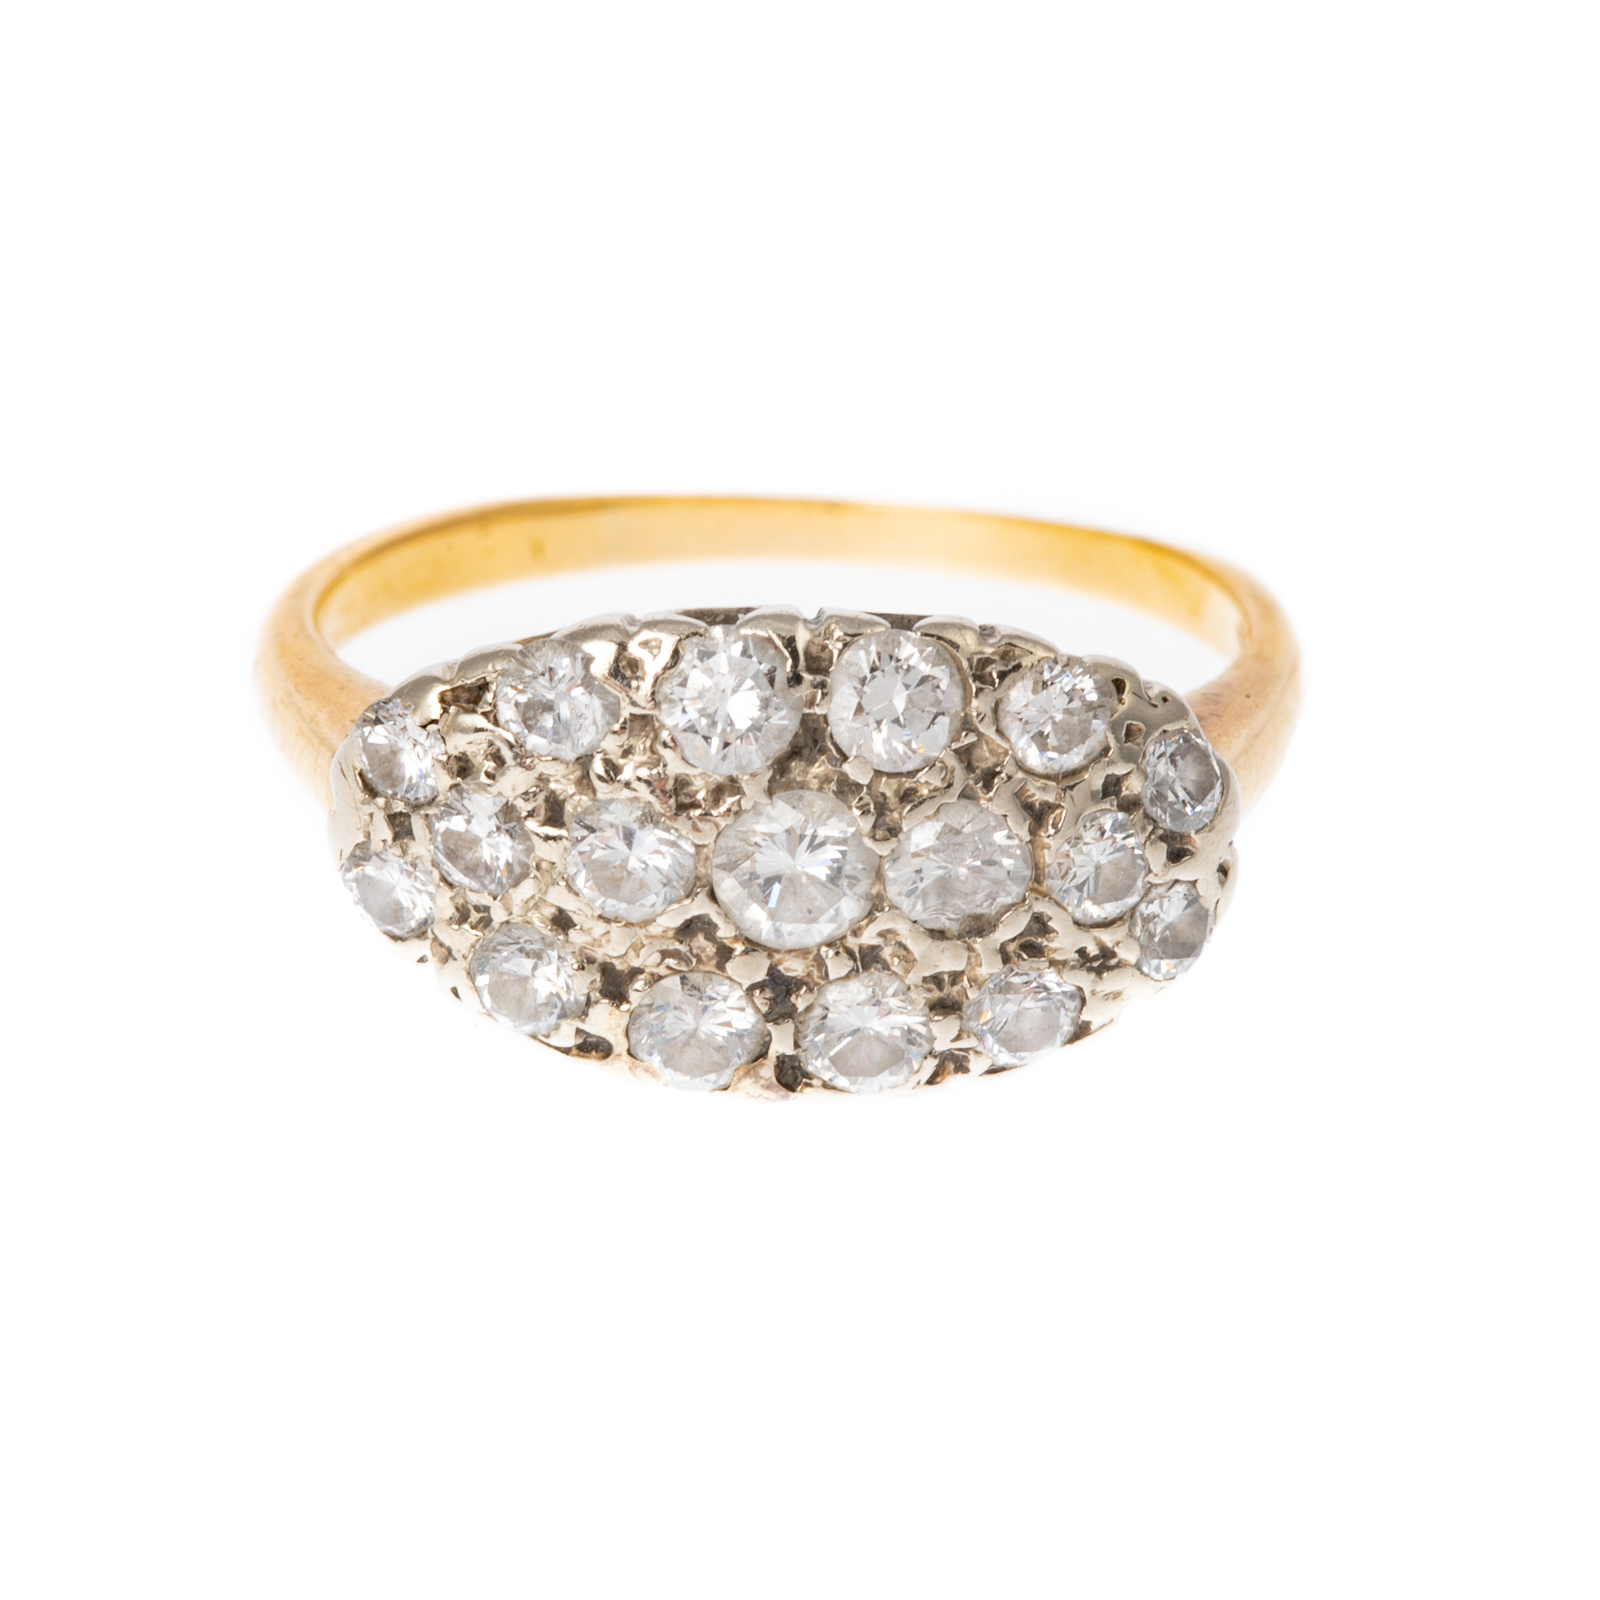 A 14K DIAMOND CLUSTER RING WITH 33866b